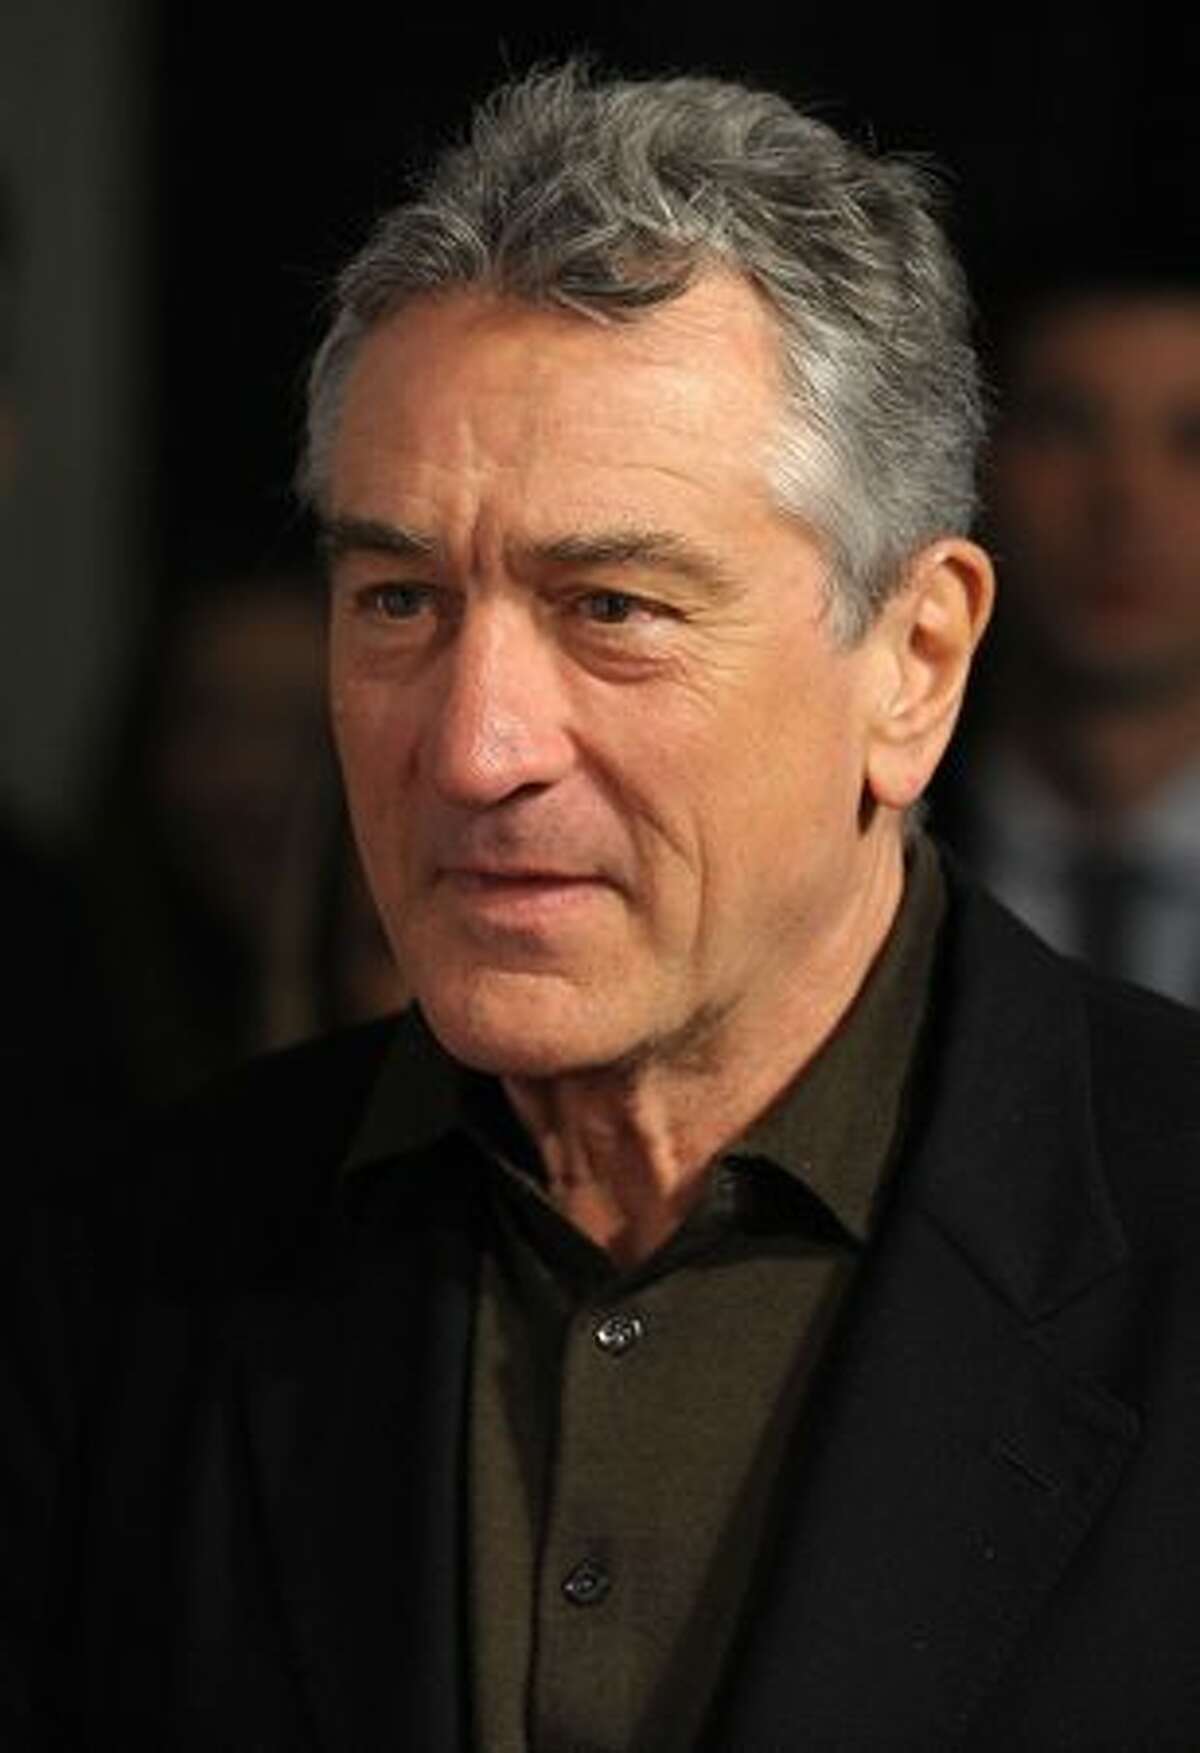 Robert DeNiro attends the Tribeca Film Institute's benefit screening of "Everybody's Fine" at AMC Lincoln Square on December 3, 2009 in New York City.